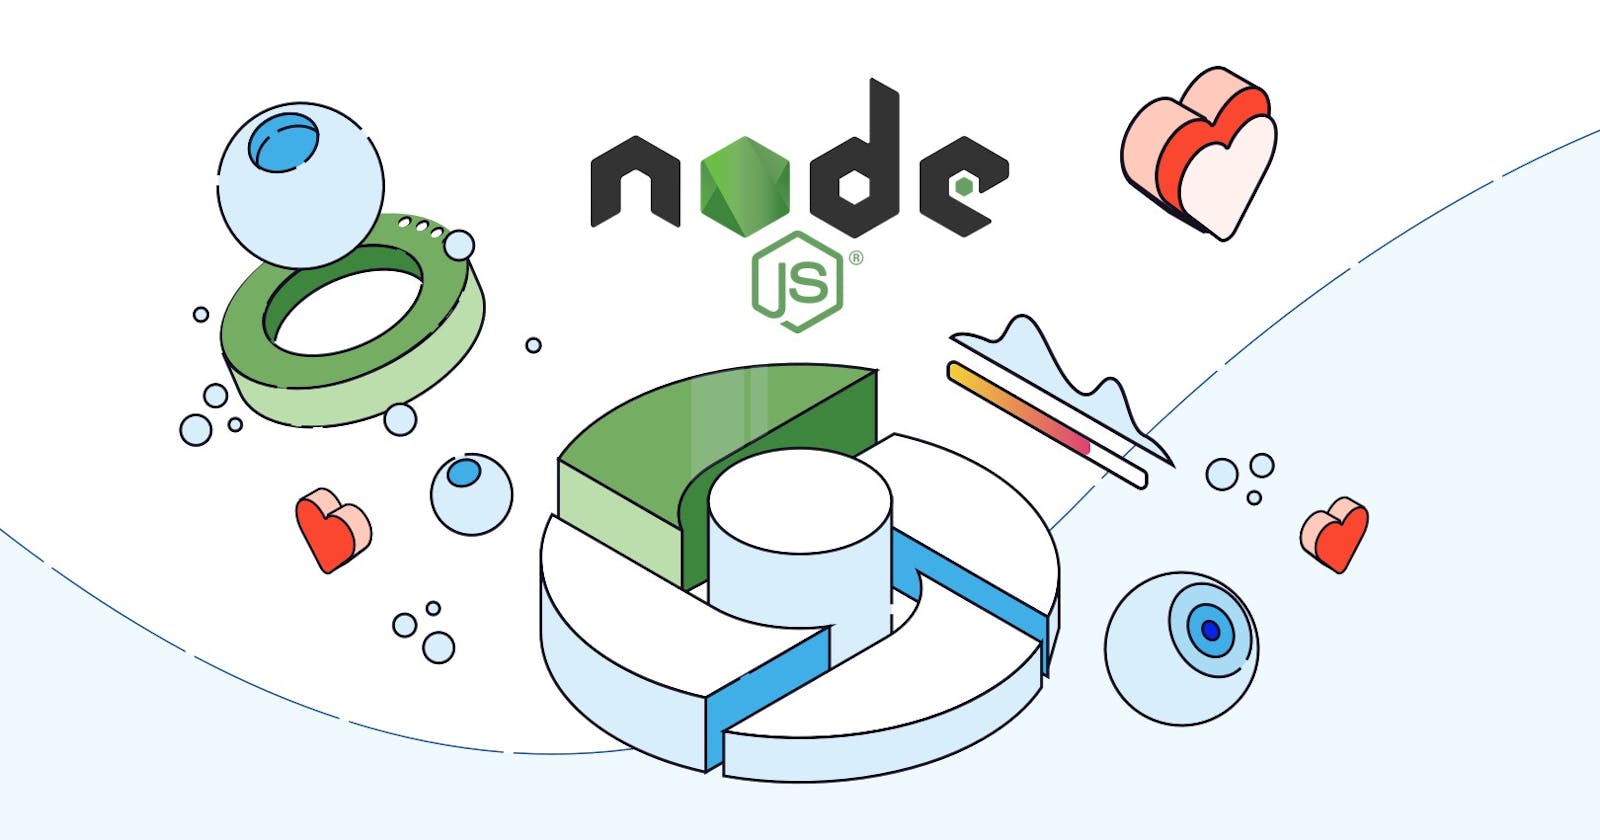 Why we don't need to upload Node Modules in Github